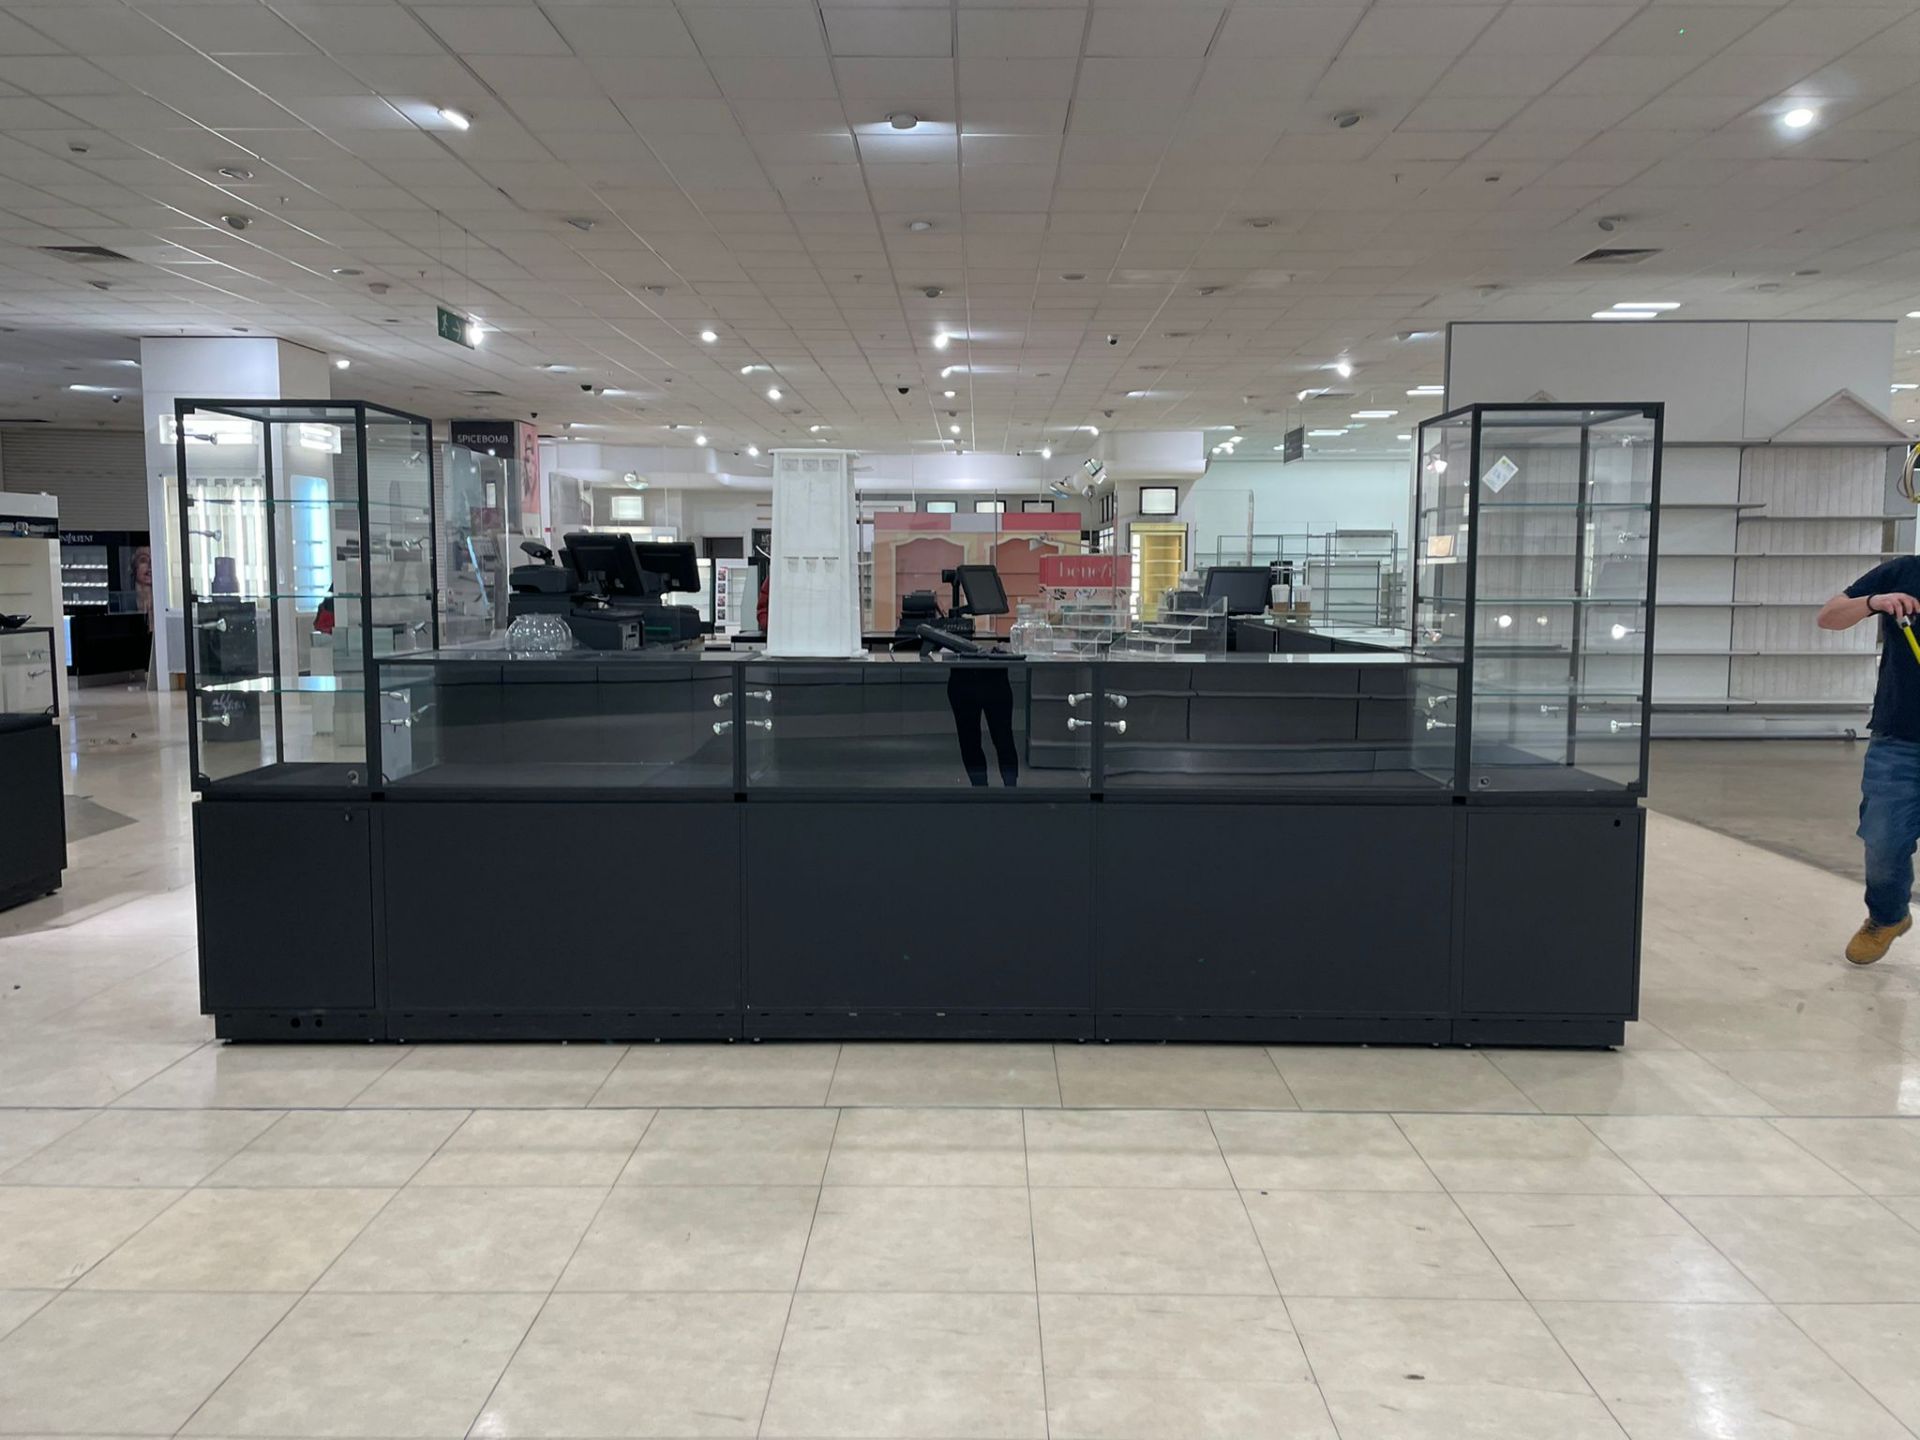 L Shaped Jewelery Stands With Glass Frontage - Image 2 of 14